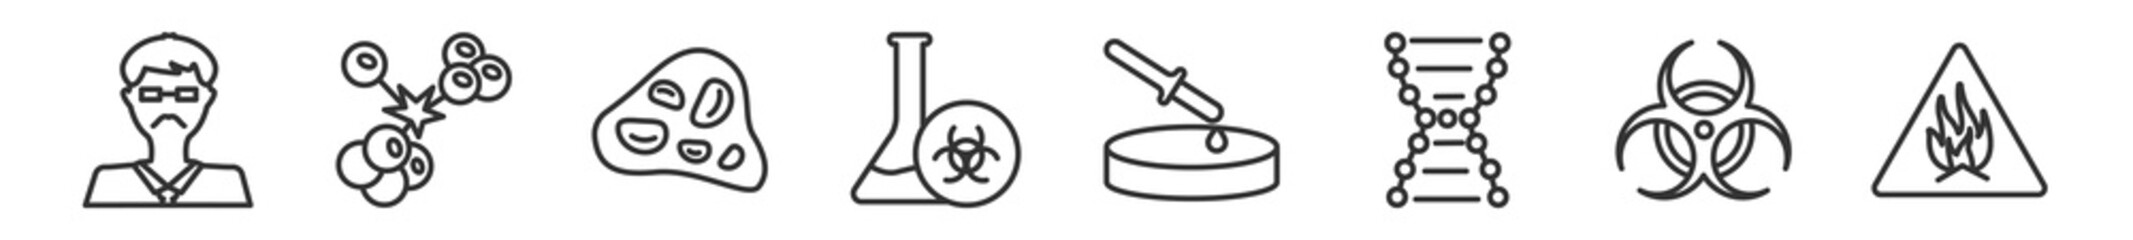 outline set of chemistry line icons. linear vector icons such as scientific, radiactive, cell, dangerous, petri dish, hazardous. vector illustration.